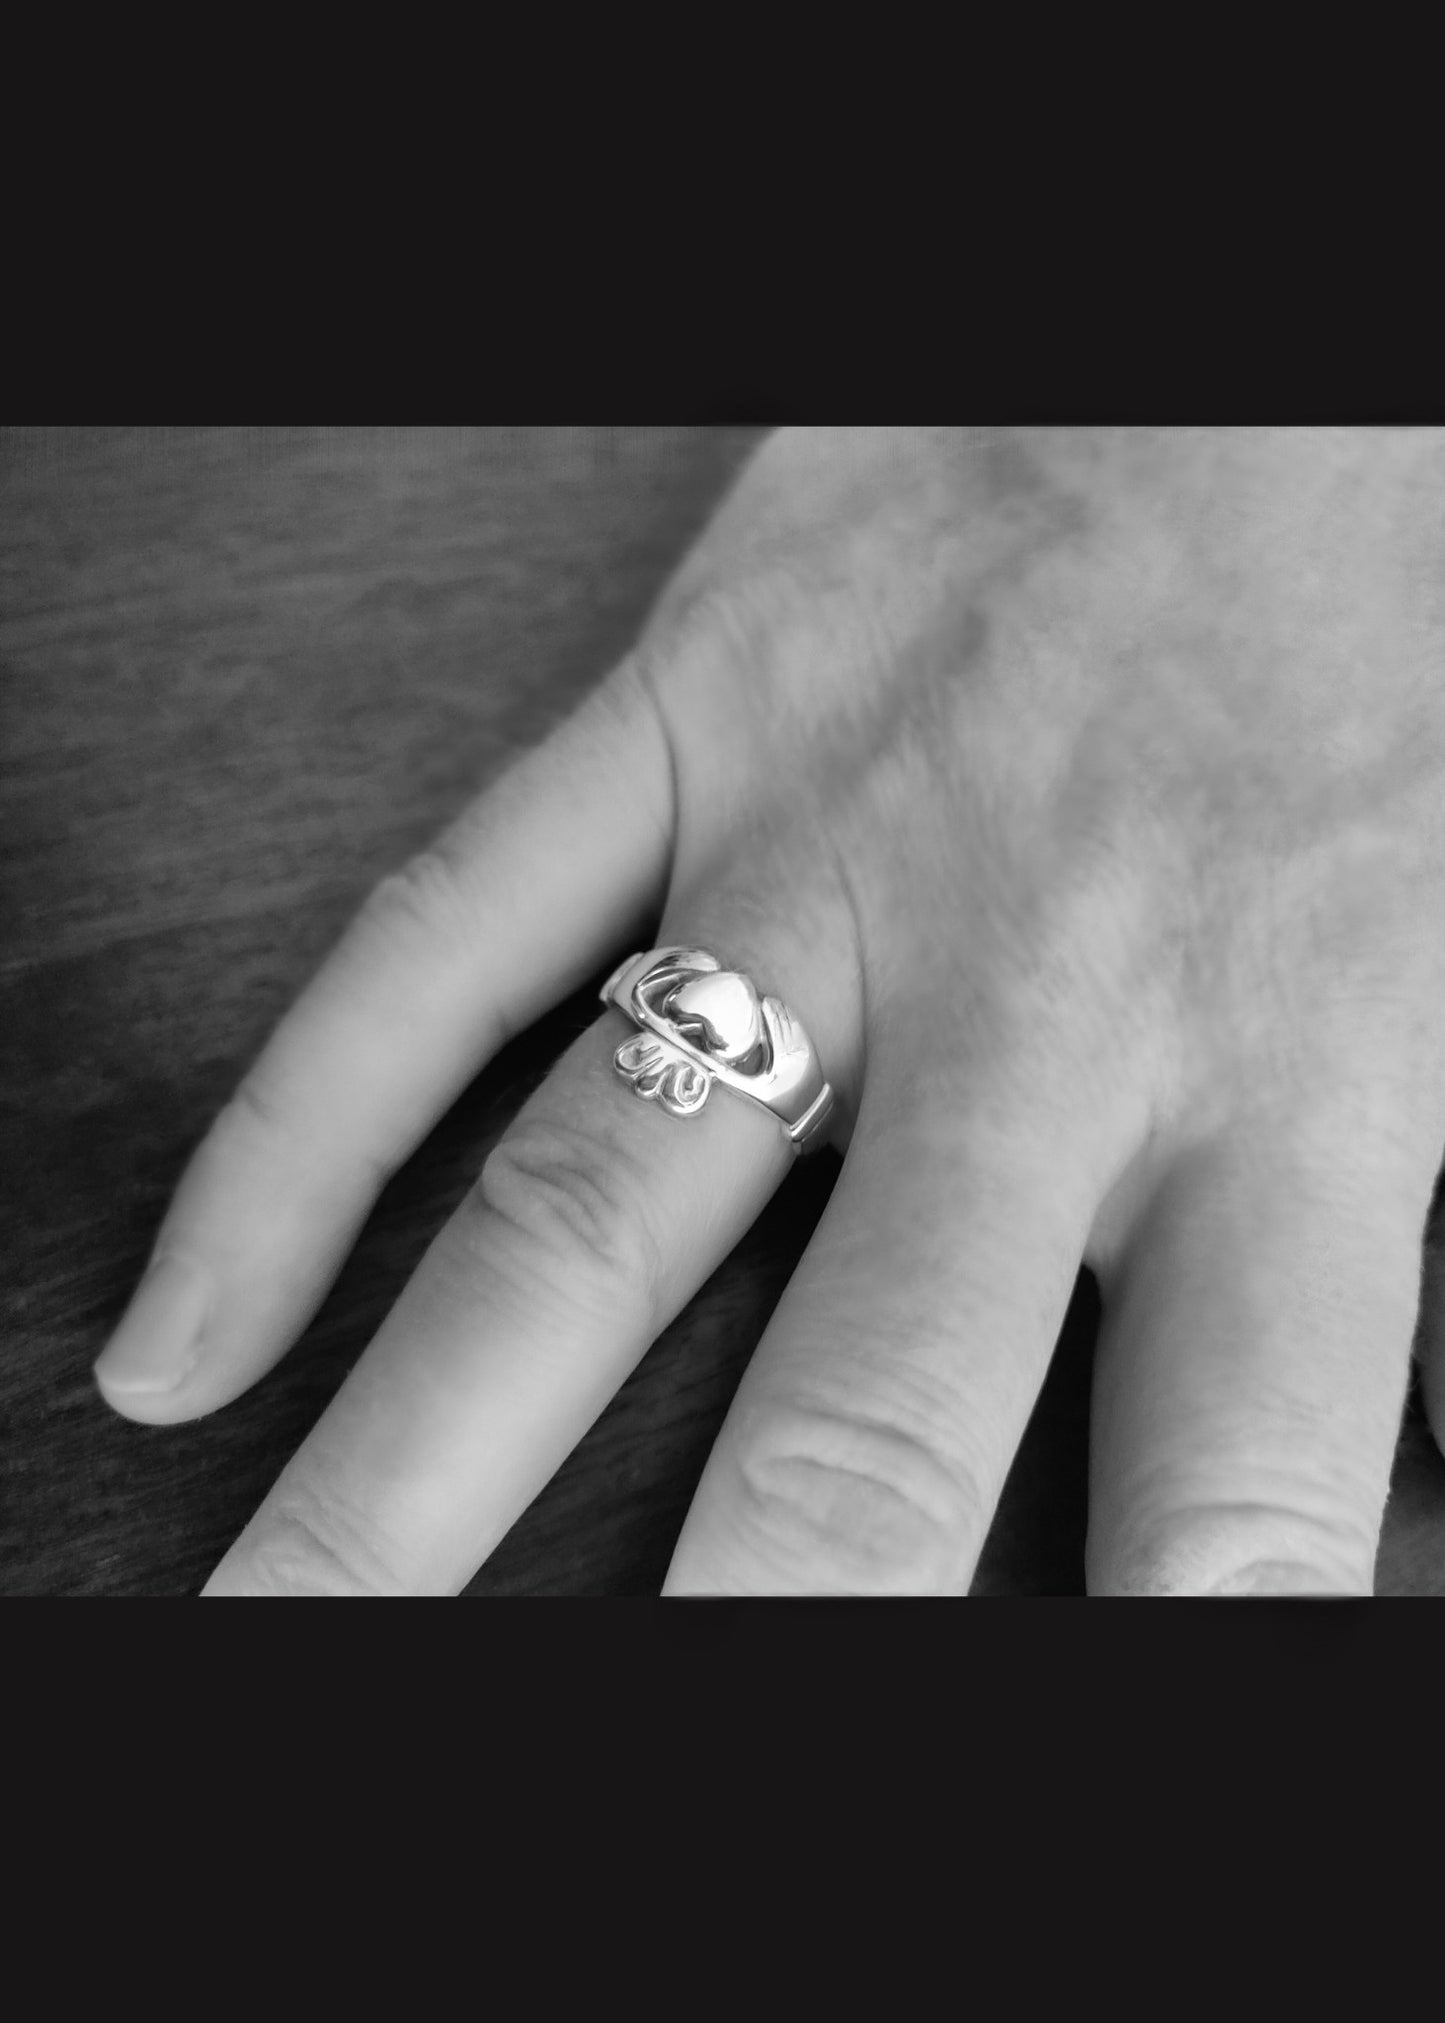 The image shows a men's claddagh ring in silver on a man's hand